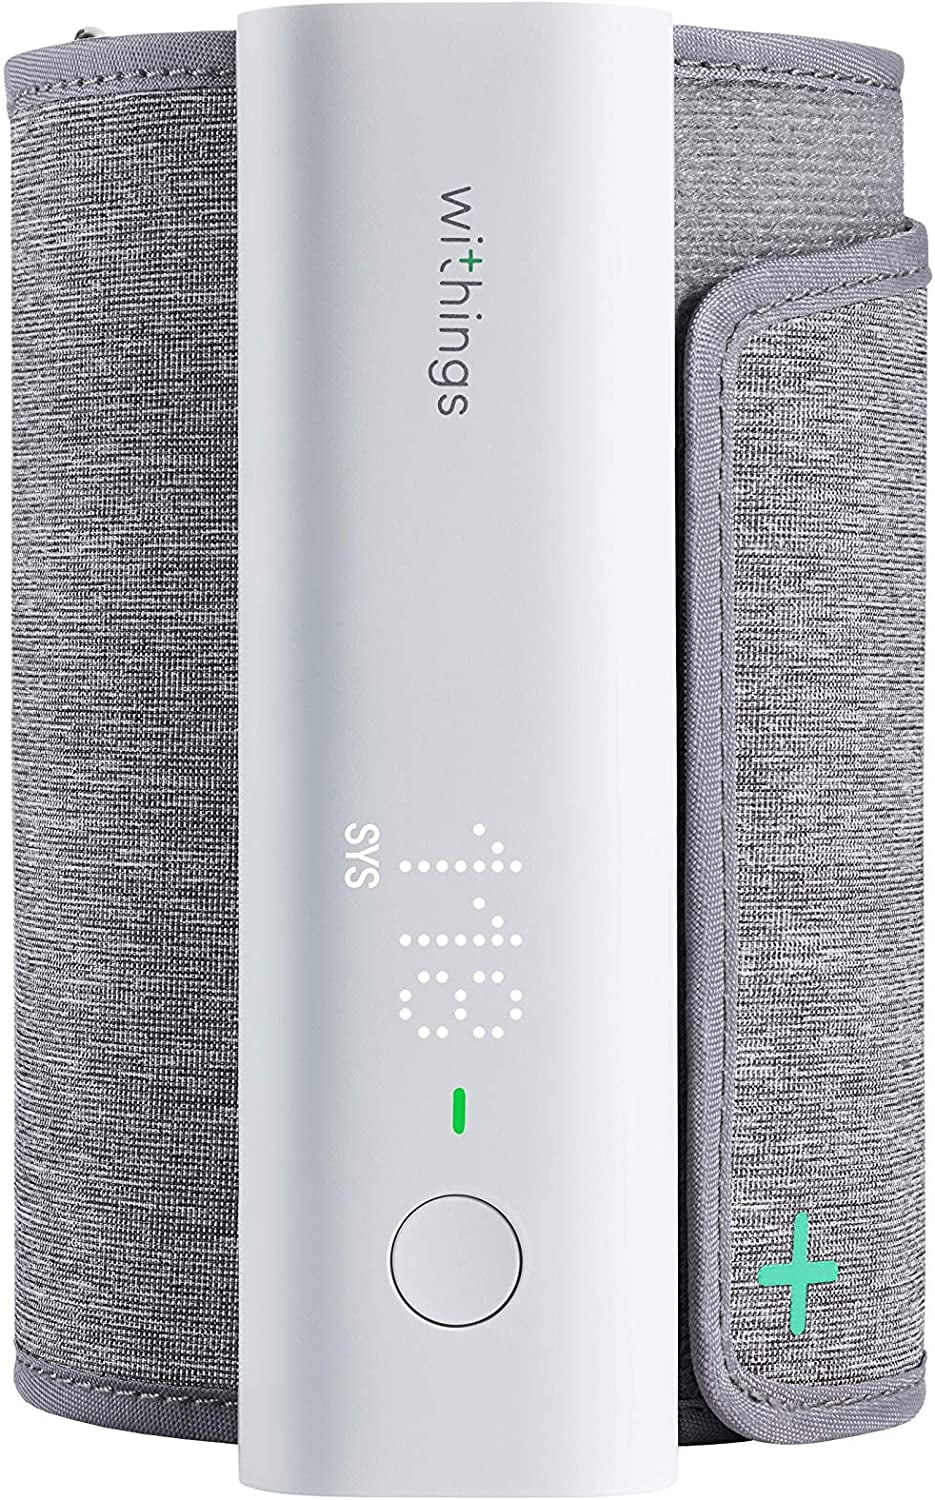 Withings' ECG-equipped smart scale earns FDA clearance